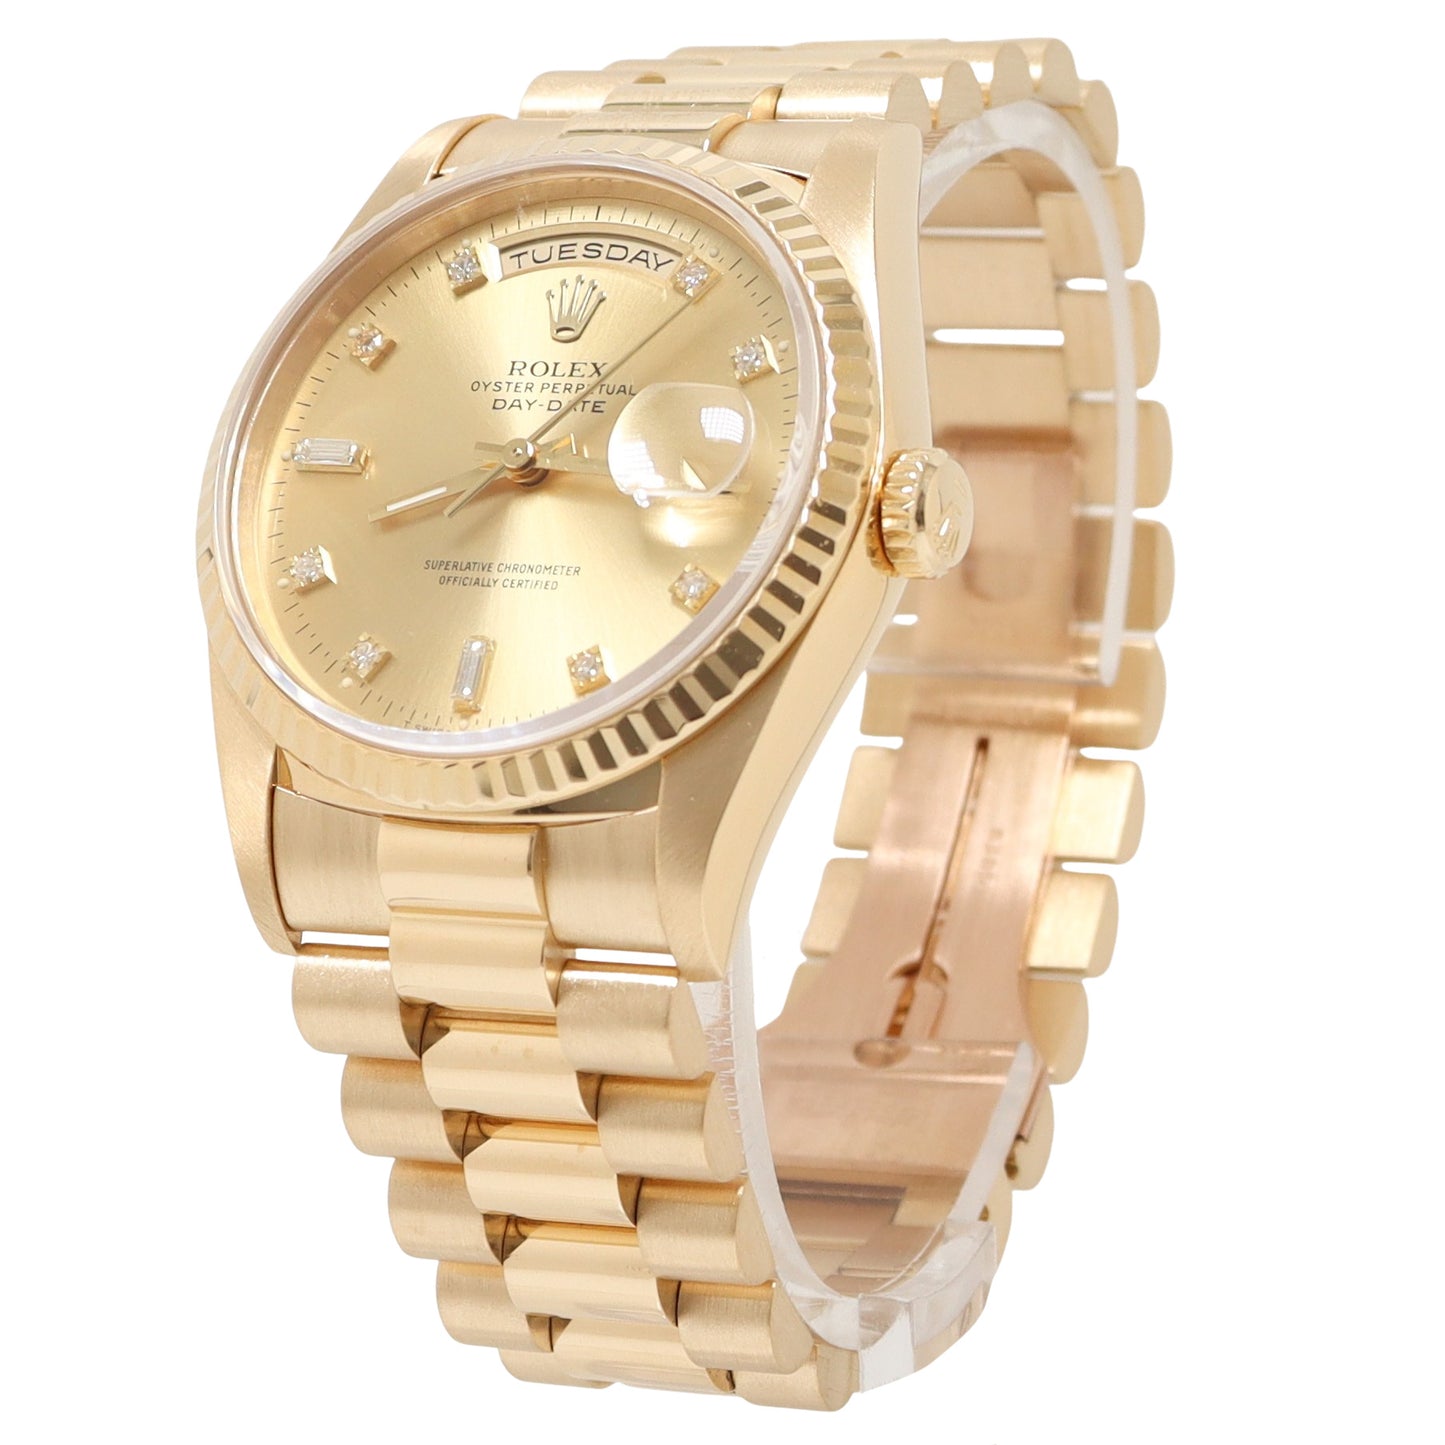 Rolex Day-Date Gold 36mm Champagne Diamond Dial Watch 18238 | Happy Jewelers